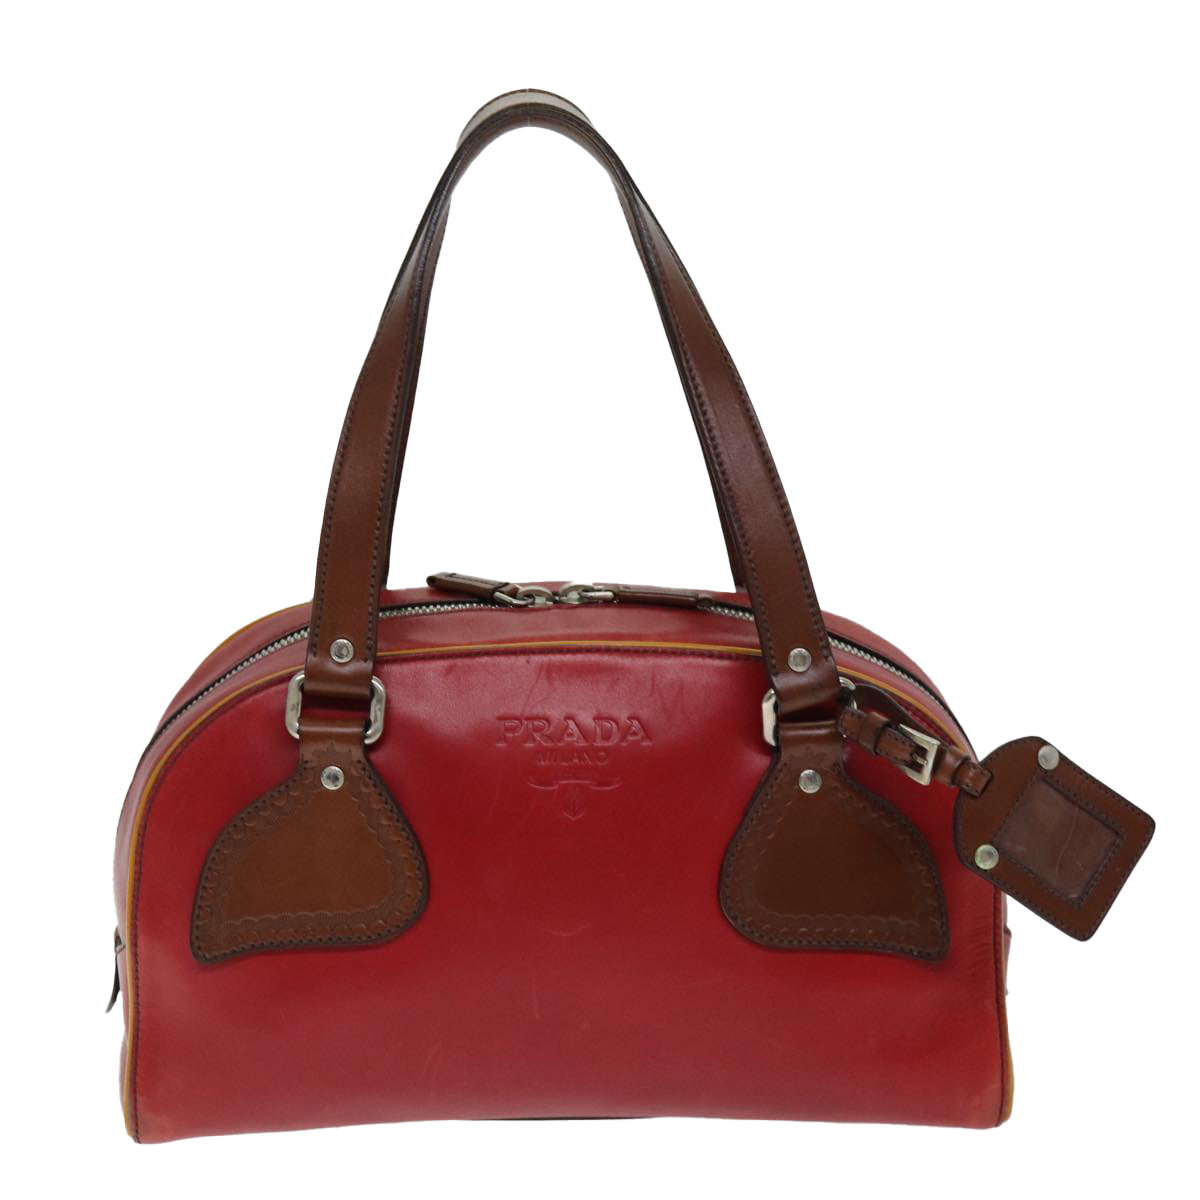 PRADA Hand Bag Leather Red Auth 74713 - 0